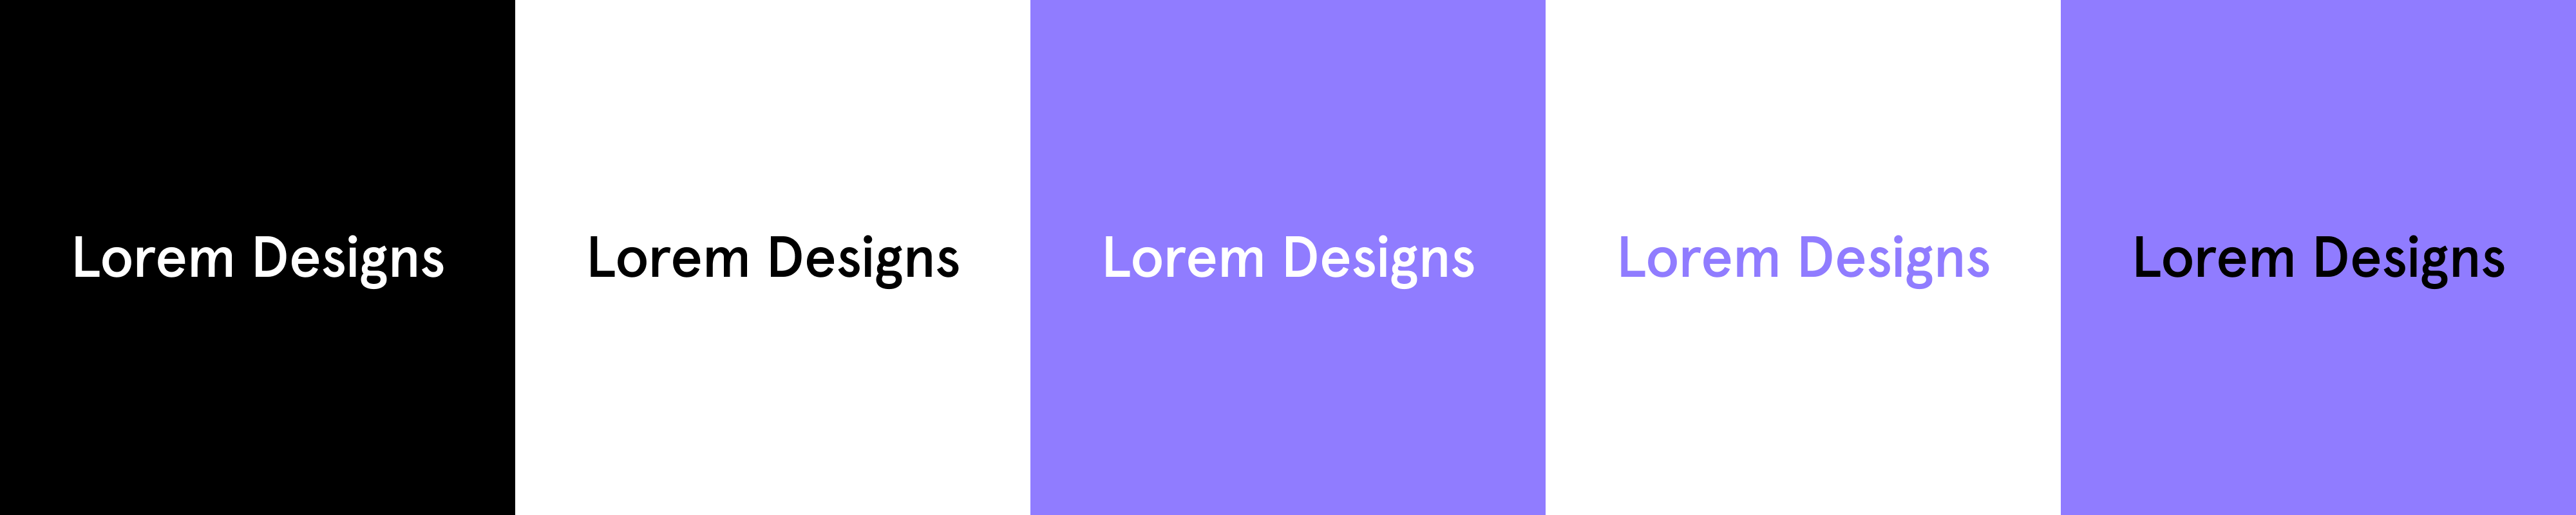 Lorem Designs - example of contrast of text against background